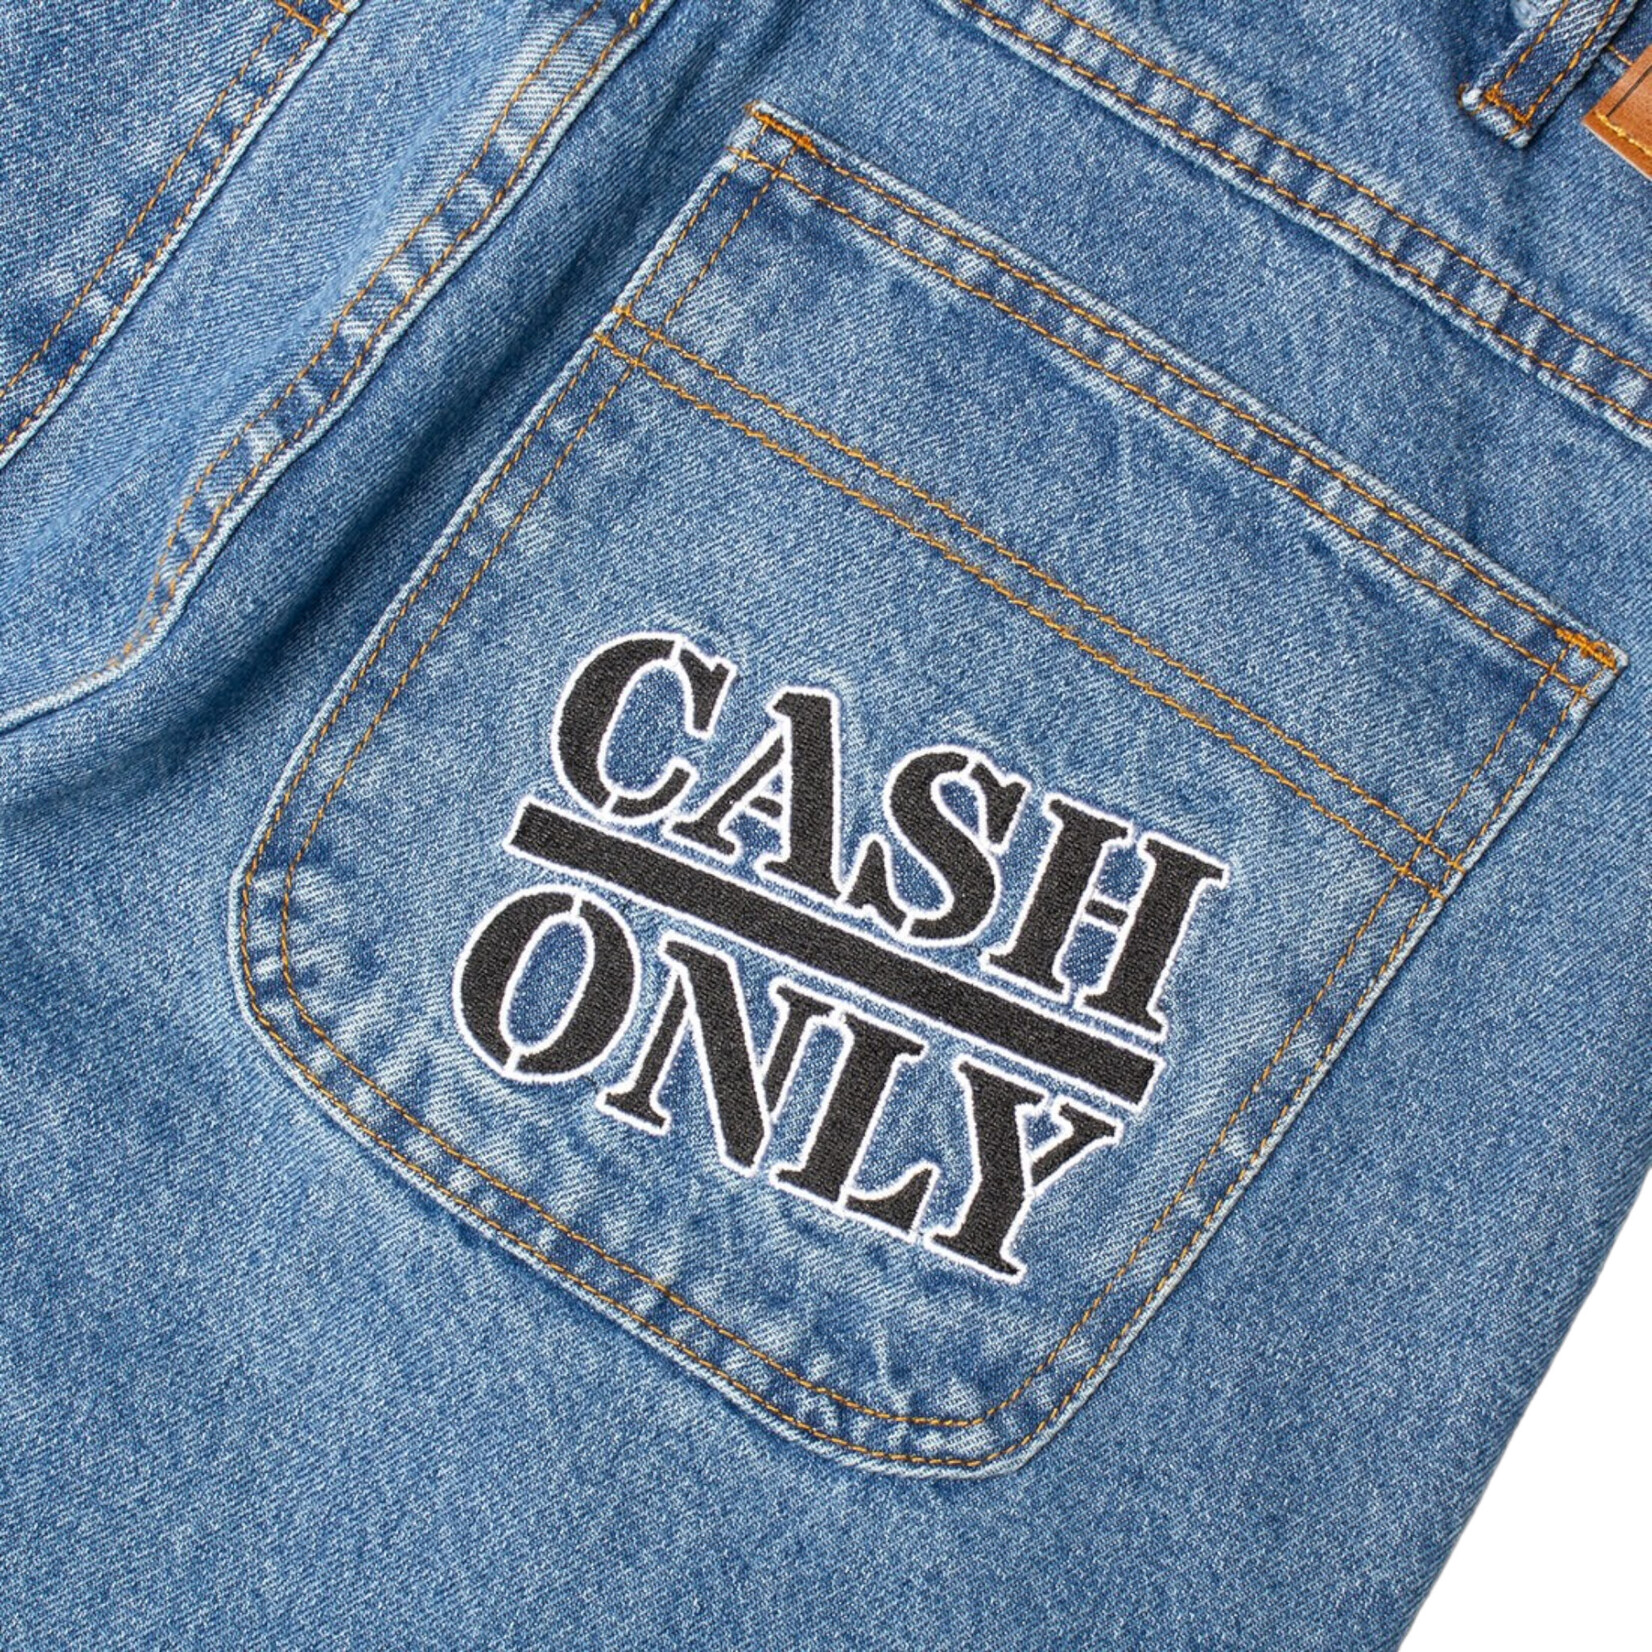 CASH ONLY Cash Only Enemy Baggy Jeans